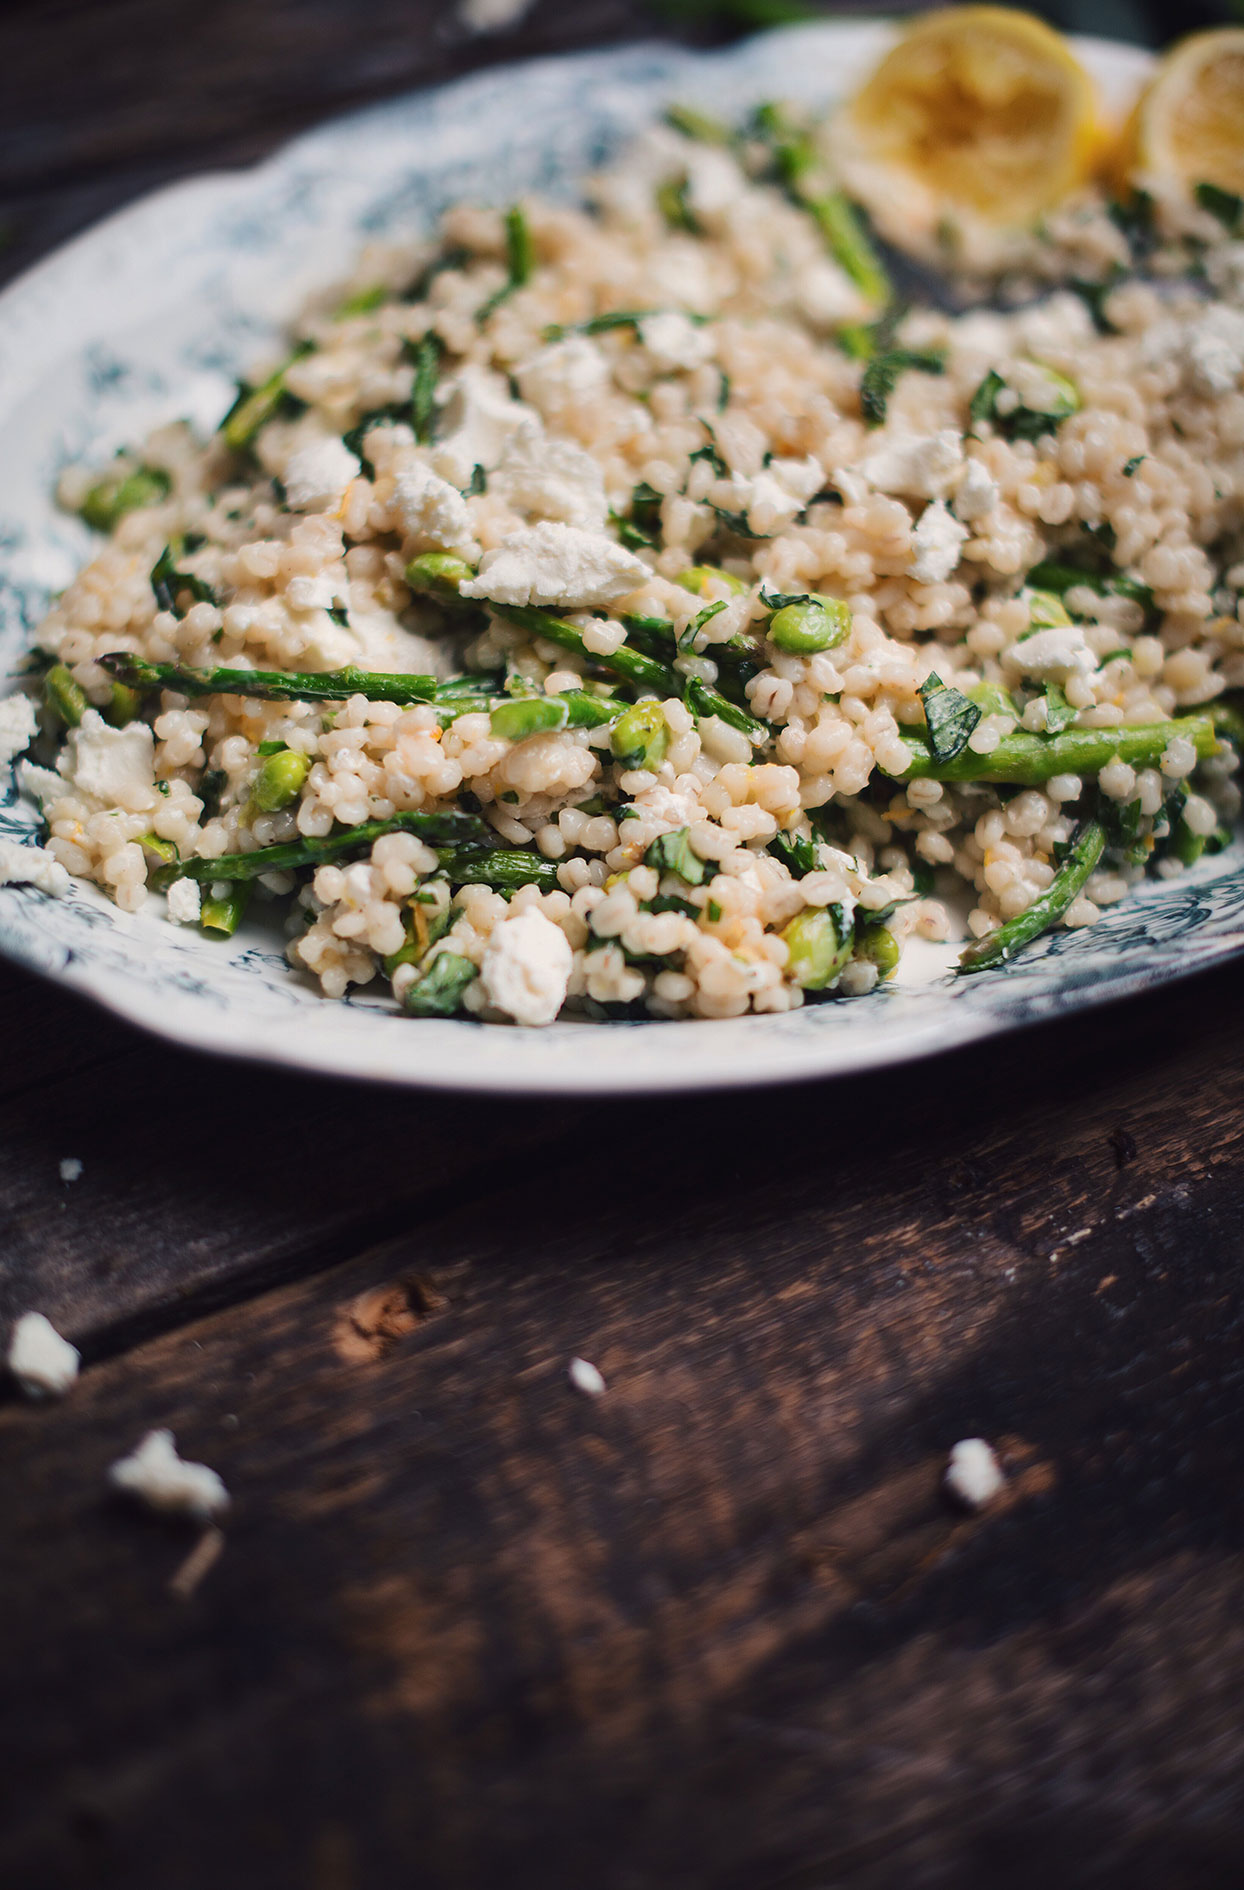 Barley salad with asparagus, edamames and goat cheese